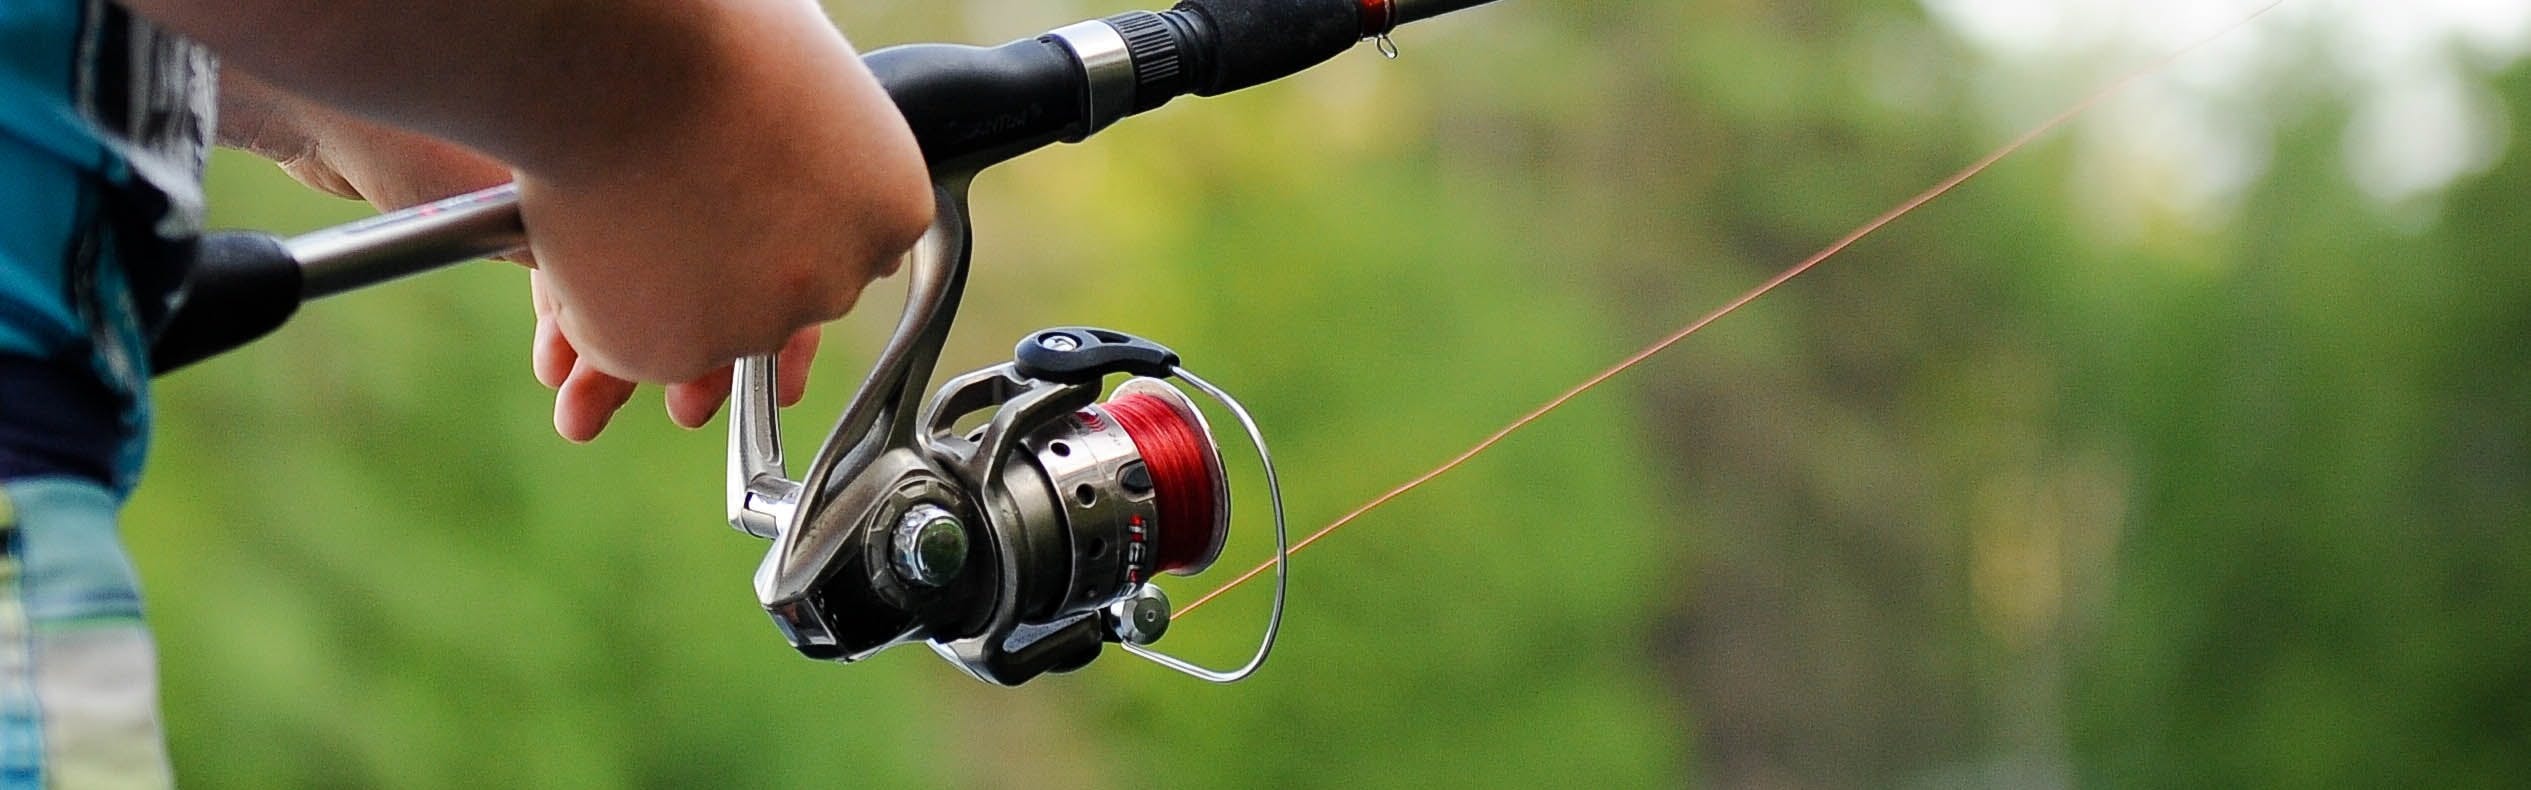 How to Spool a Baitcaster or Spinning Reel for Zero Fishing Line Twist